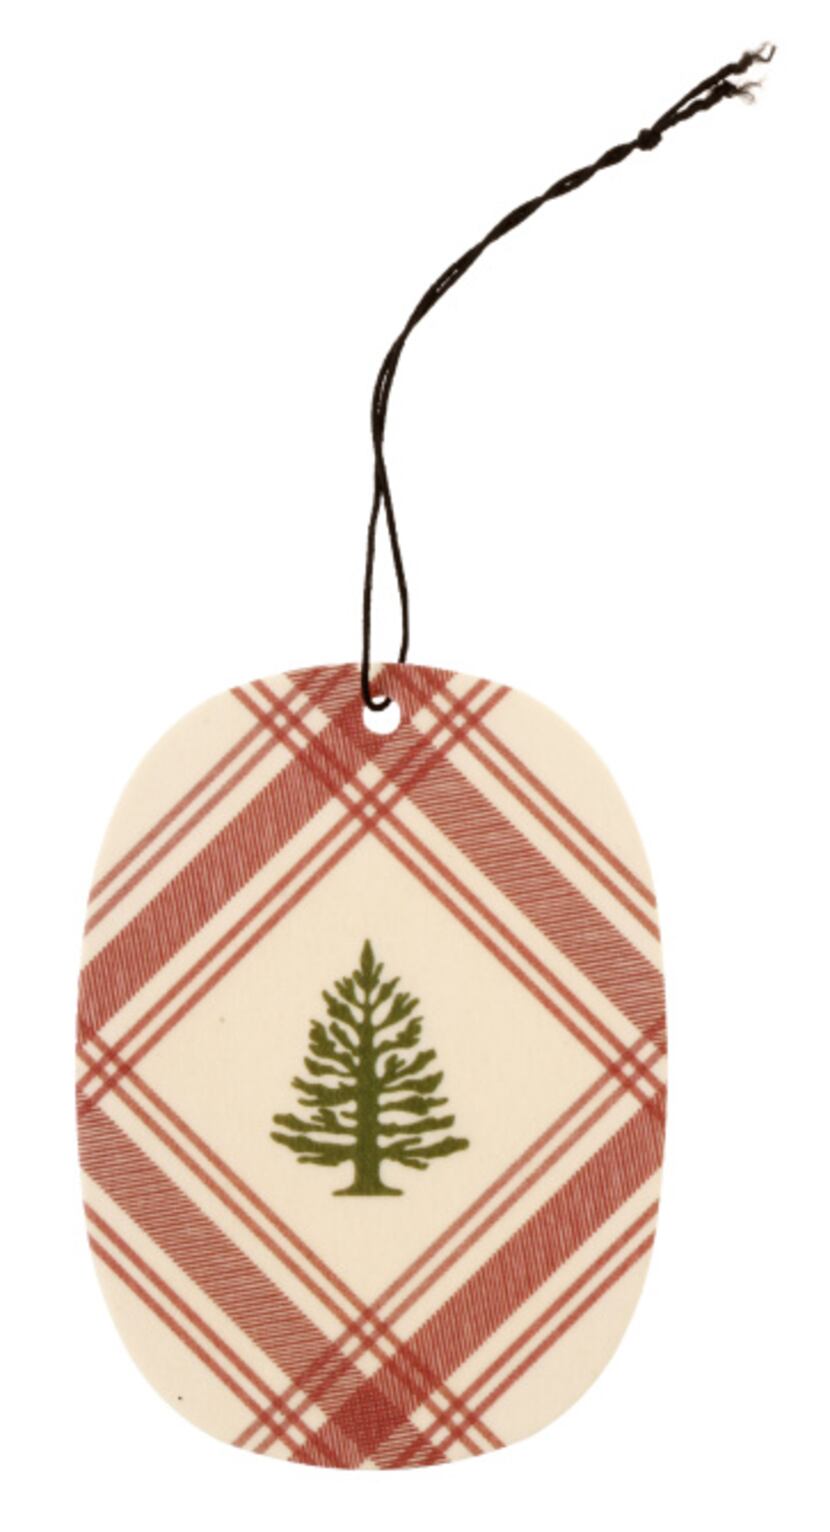 Garden gifts, photographed November 30, 2012. Thymes Frasier fir decorative sachet with...